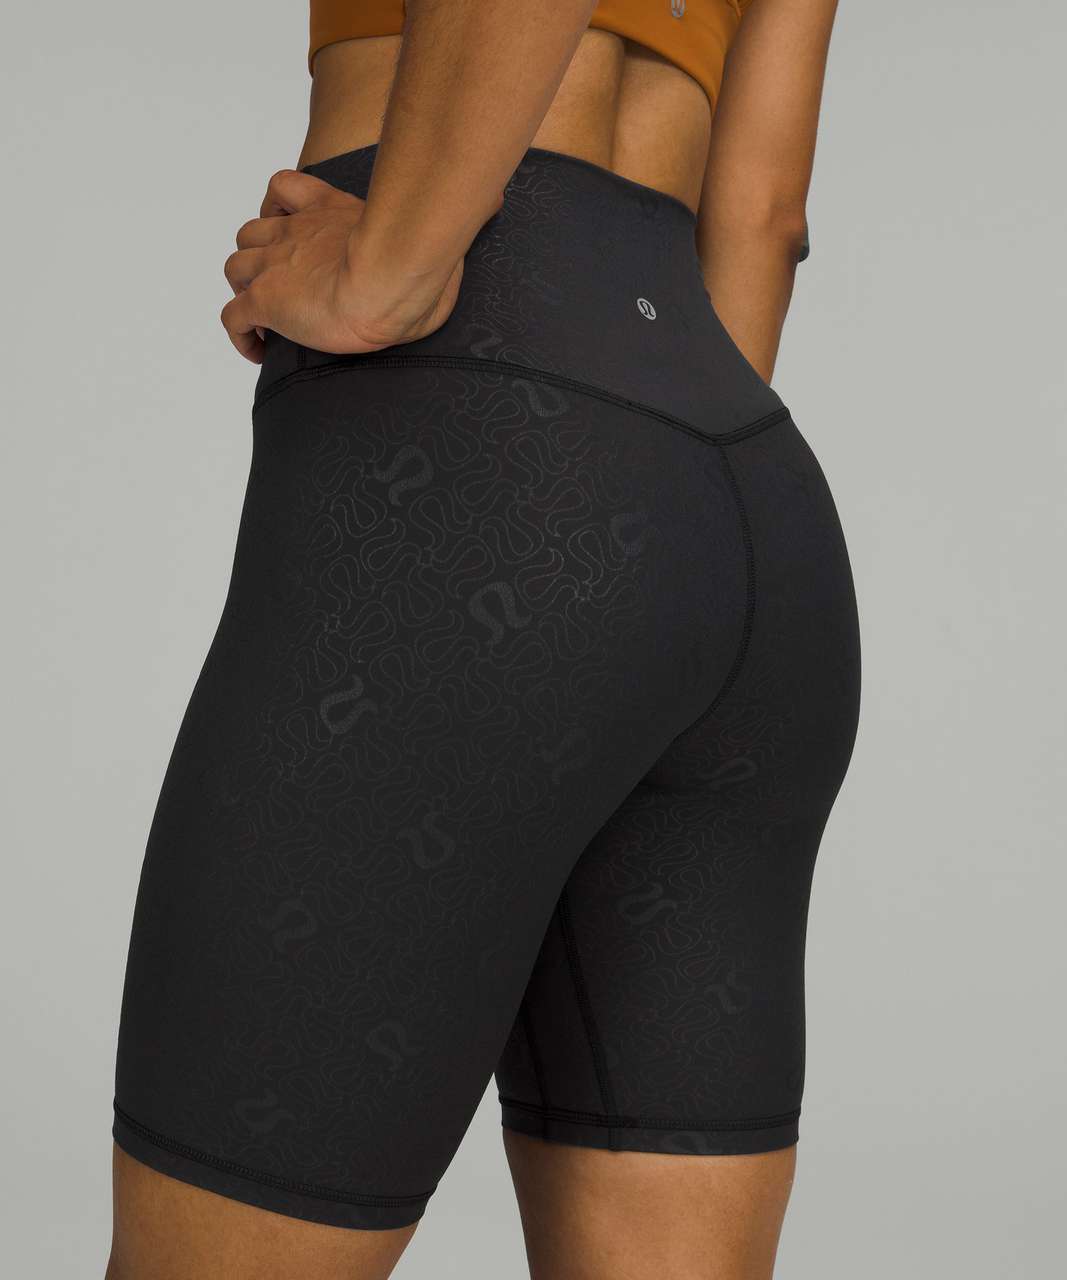 How do you feel about the yogo emboss black?? Thoughts? Opinions? :  r/lululemon